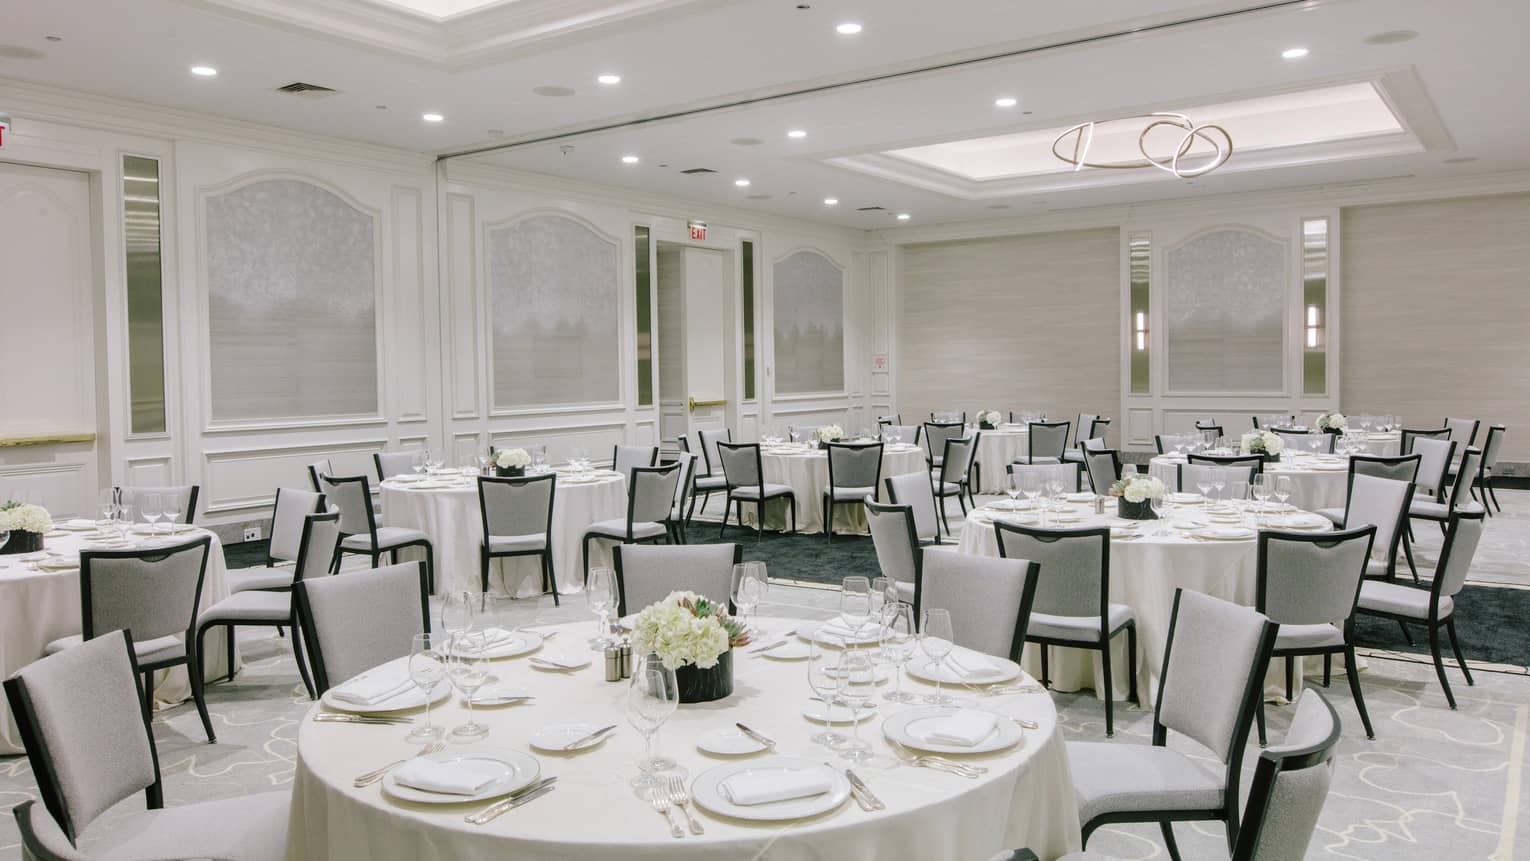 A large room with round tables covered in white cloth.